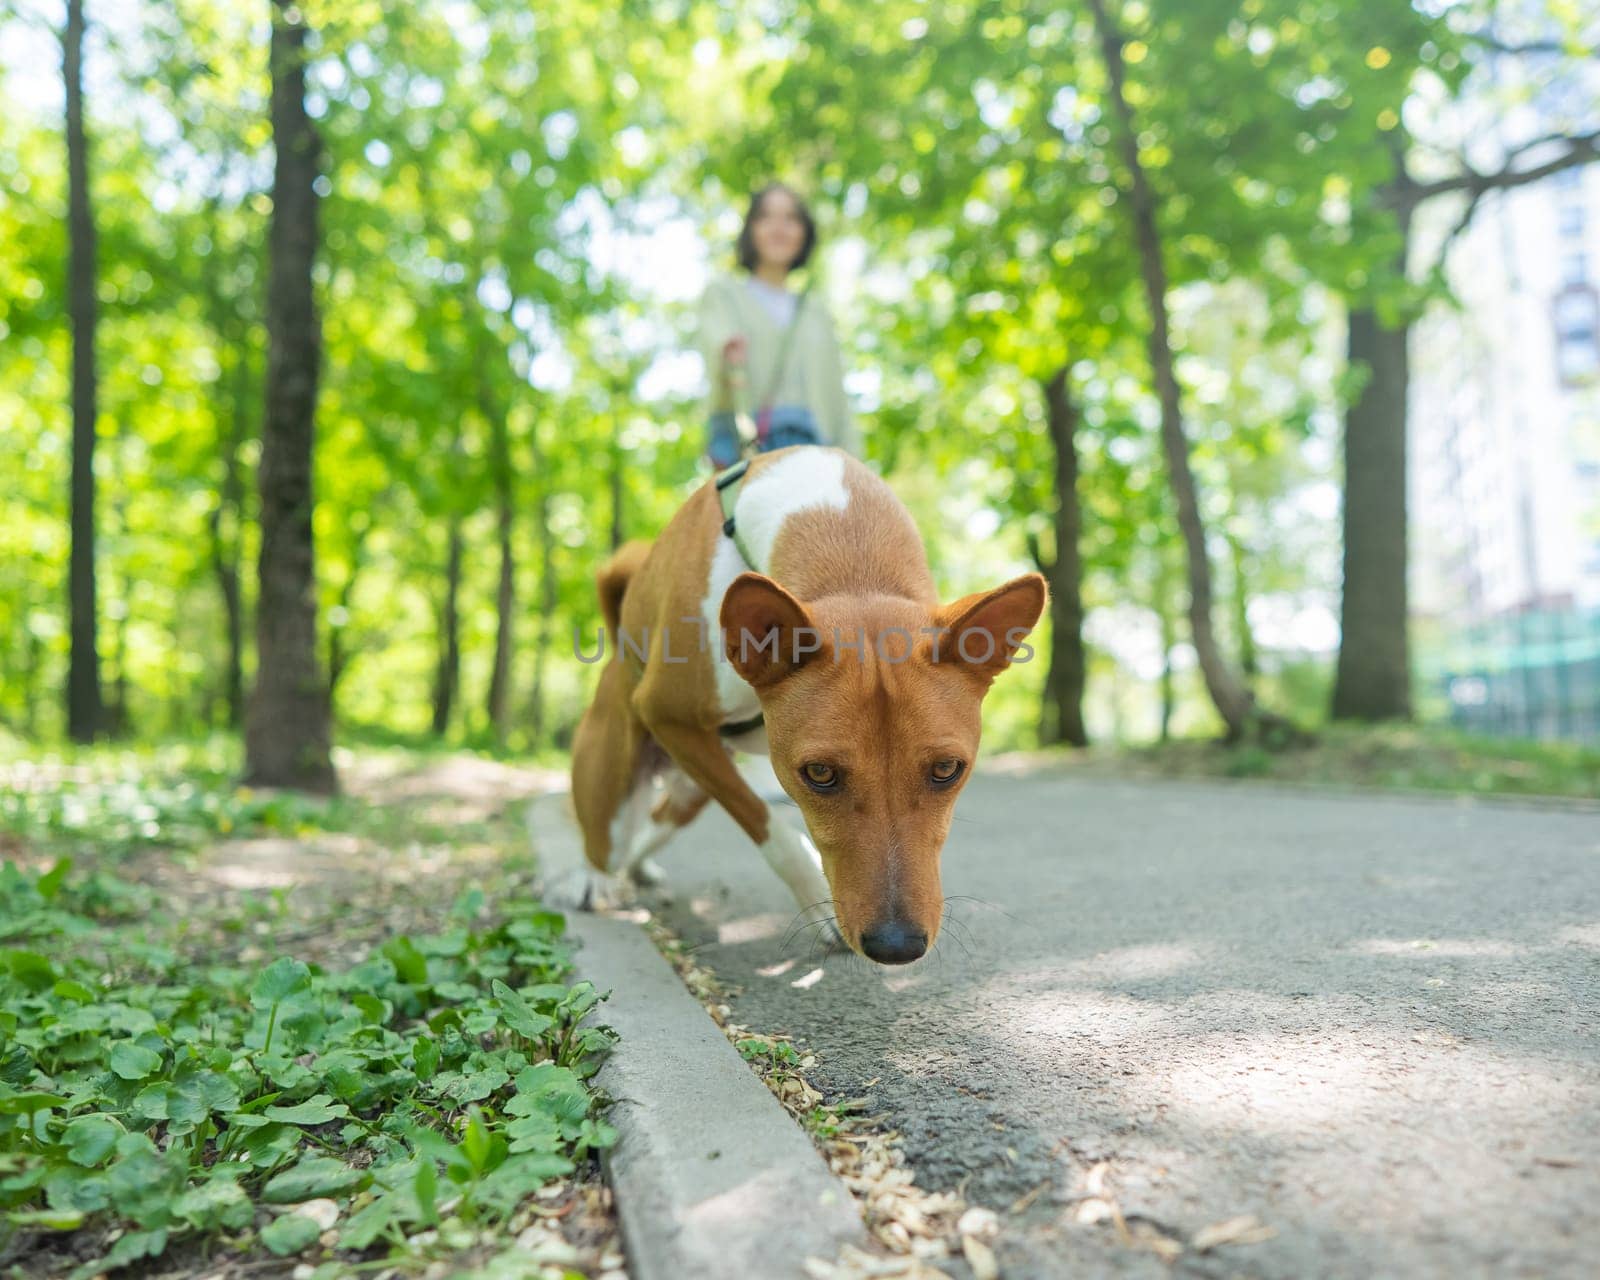 A young woman walks with an African basenji dog on a leash in the park. by mrwed54